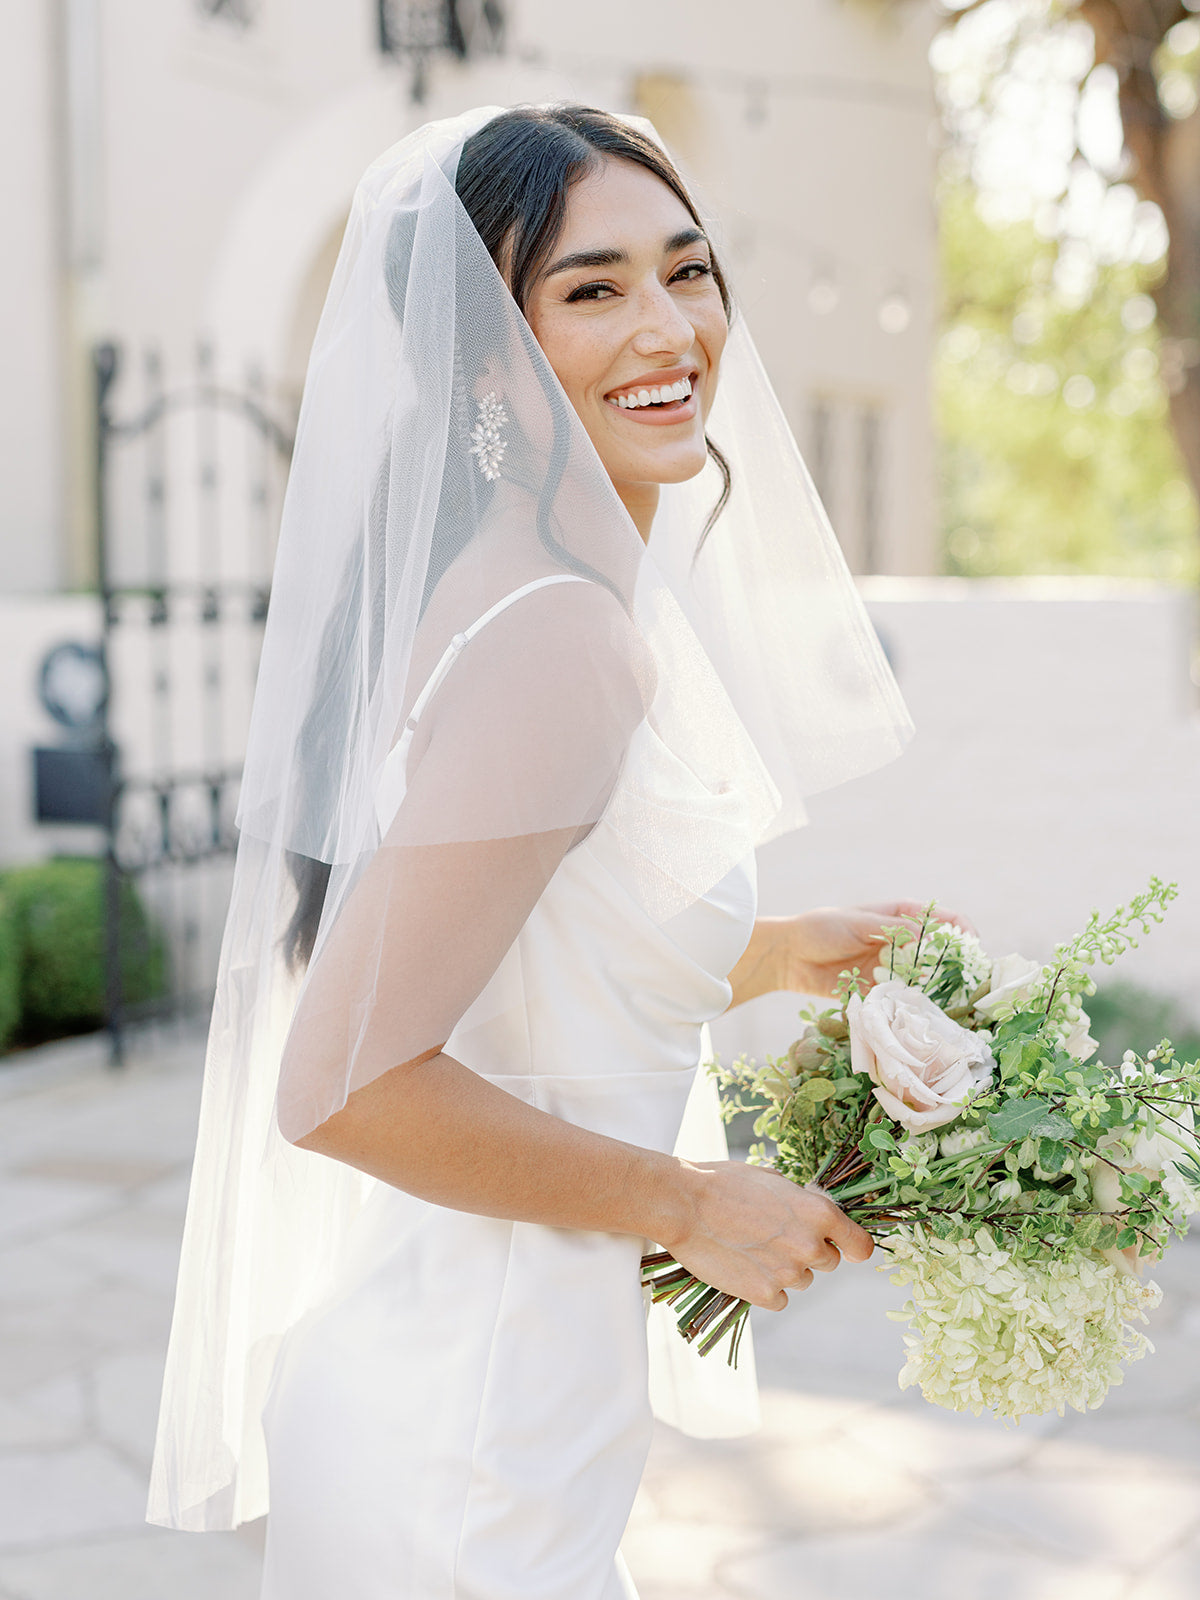 Two Tier Cathedral Length Veil with 1/4 Satin Edge |  Off-White / 30/90 Inches